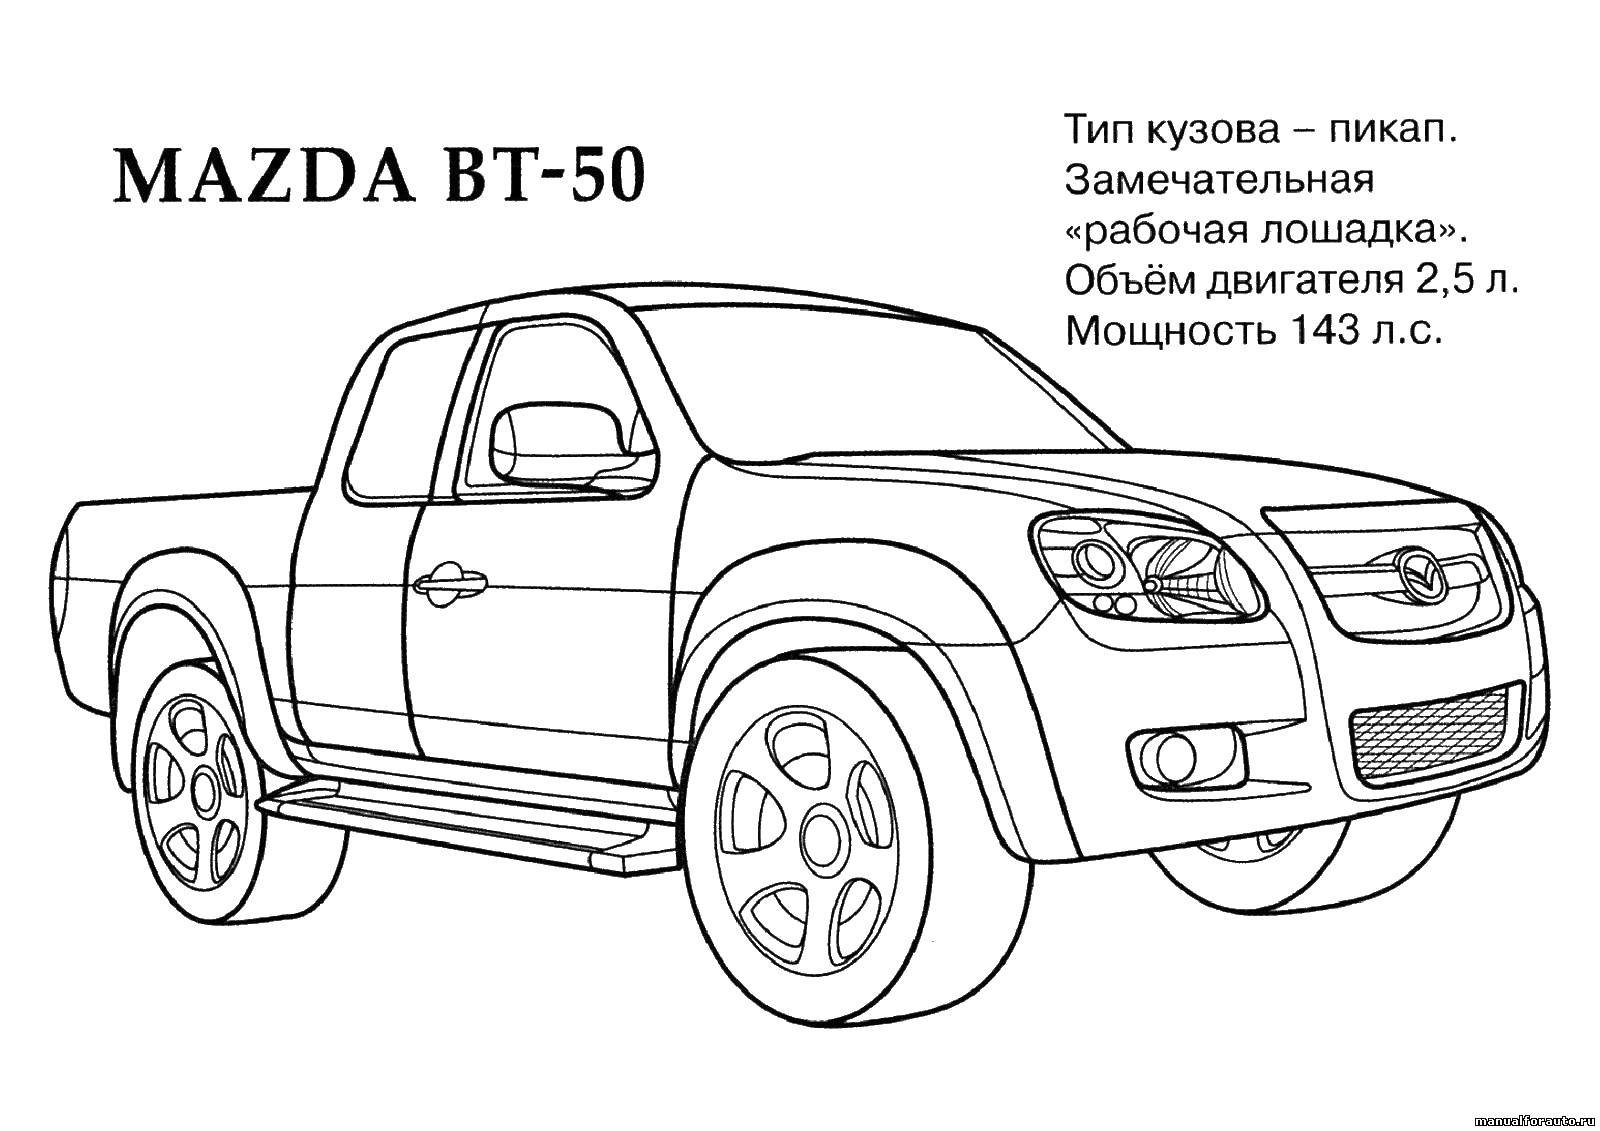 Coloring Mazda, BT 50. Category coloring. Tags:  Transport, car.